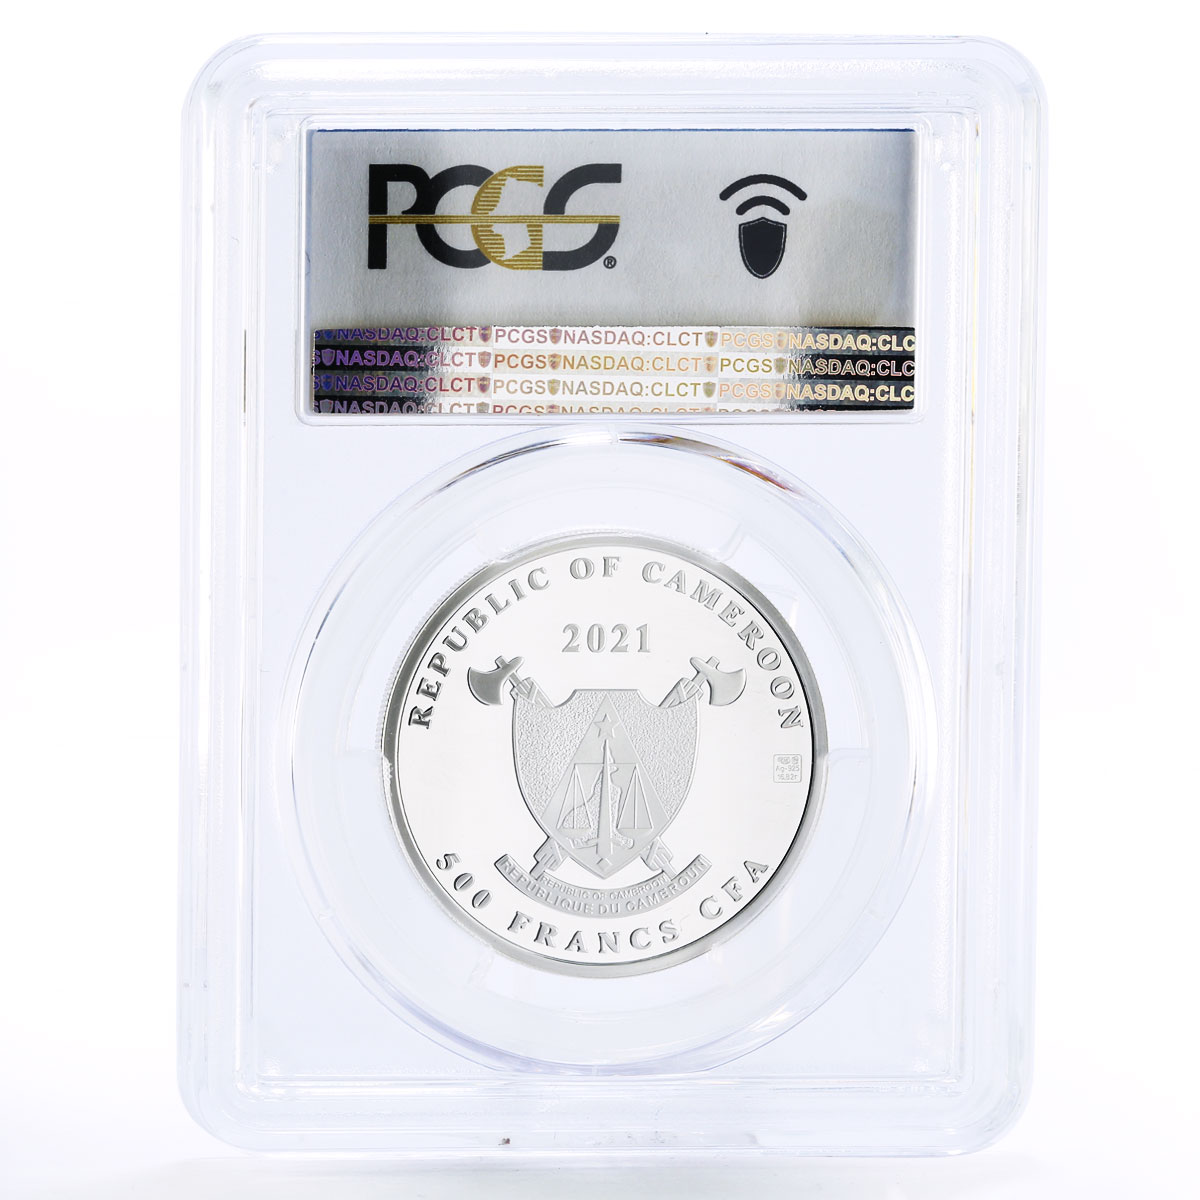 Cameroon 500 francs Swallow Nest Palace Birds Ship PR70 PCGS silver coin 2021